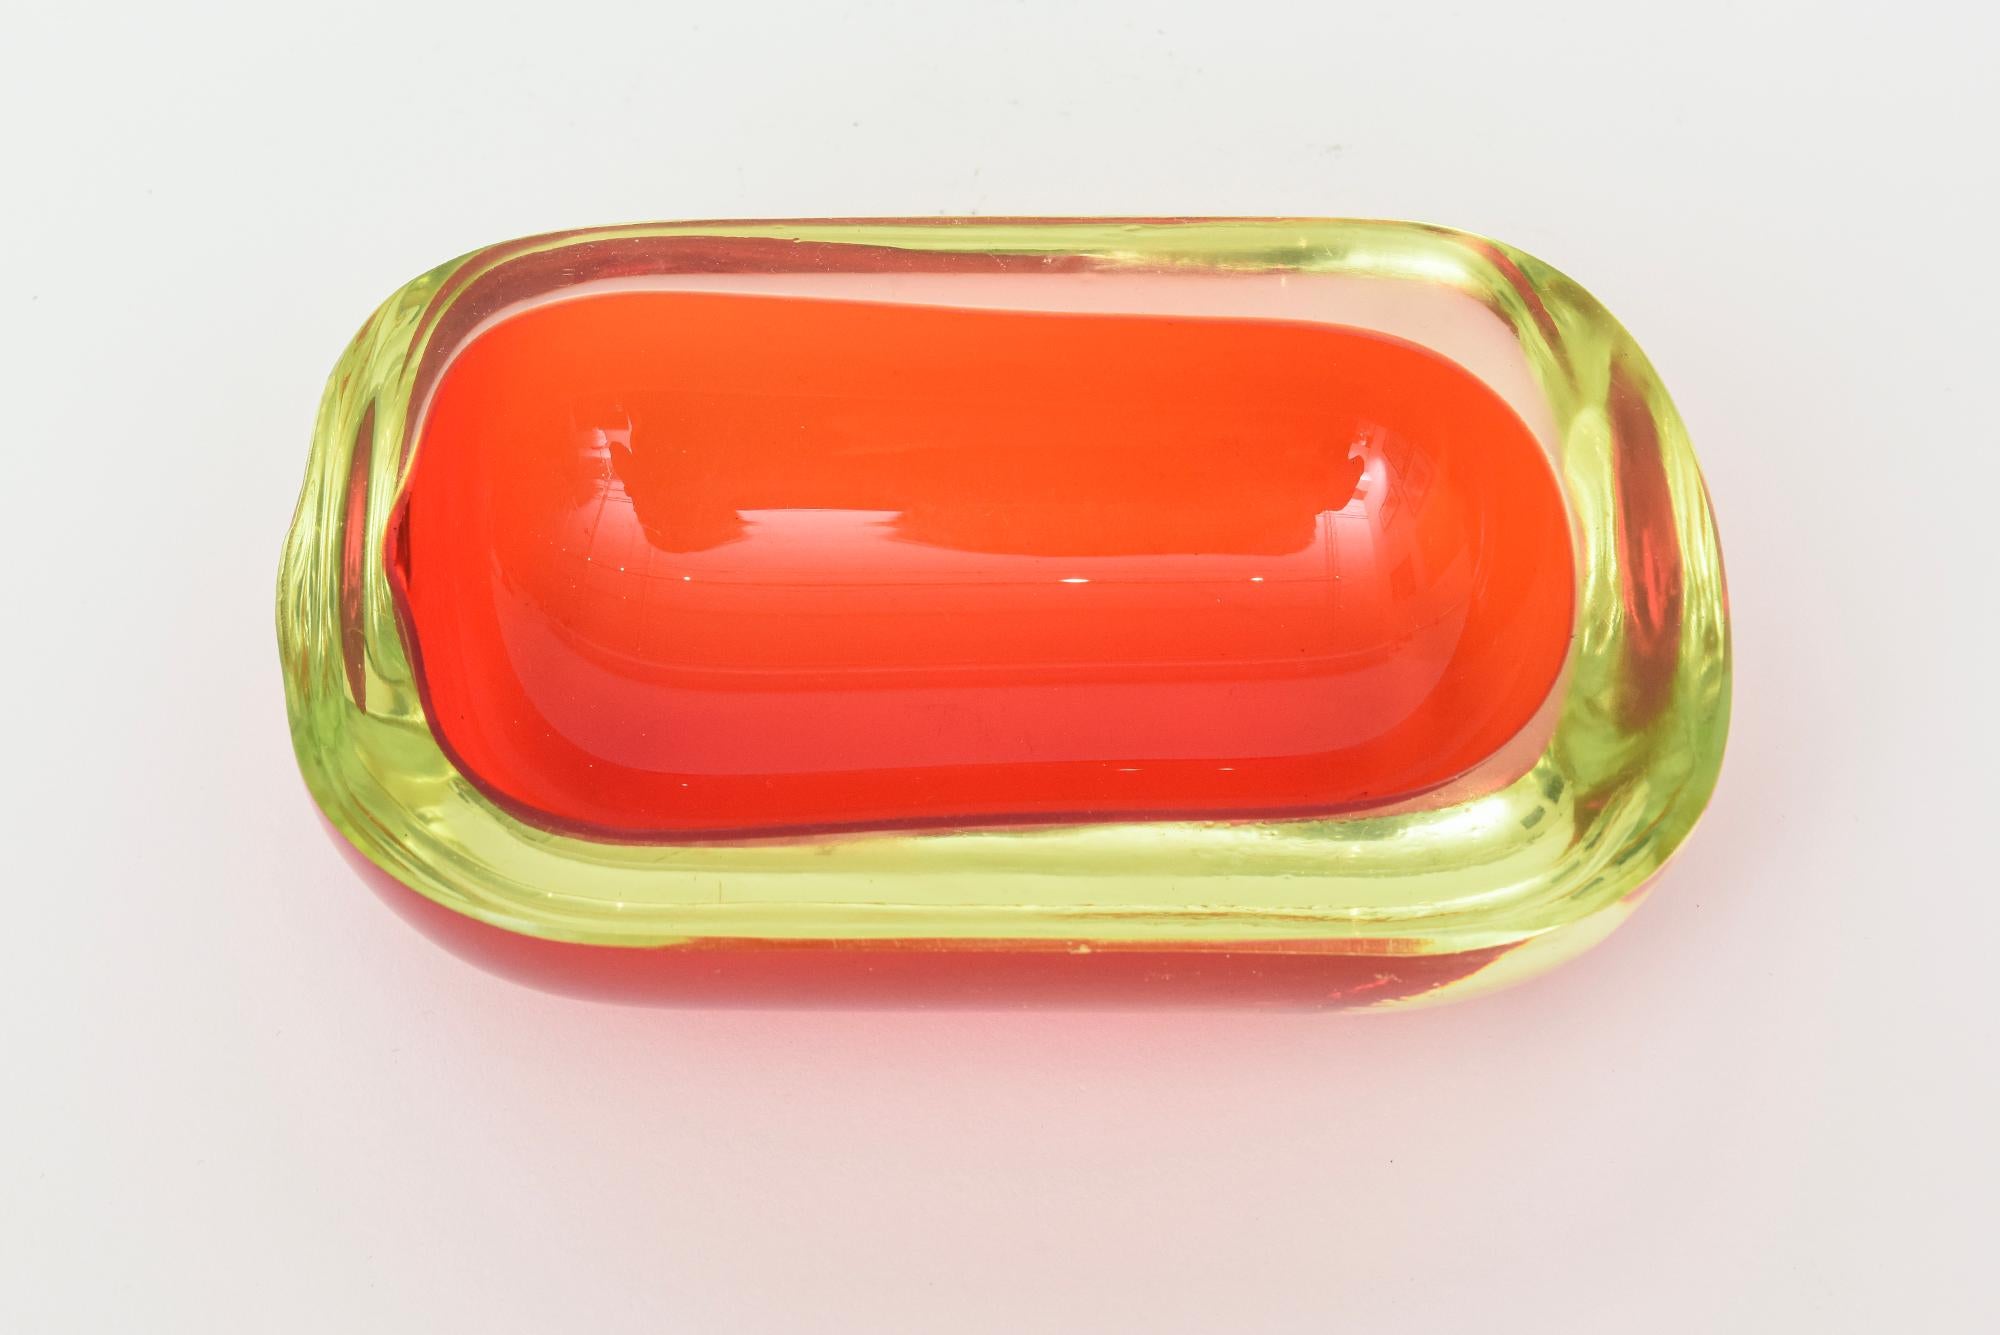 This fabulous vintage Murano Flavio Poli hand blown glass oblong bowl or serving piece is from the 60's. It is red with a yellow rim that has uranium in it which is very desirable. The colors are vibrant and the bowl is a wonderful size. 